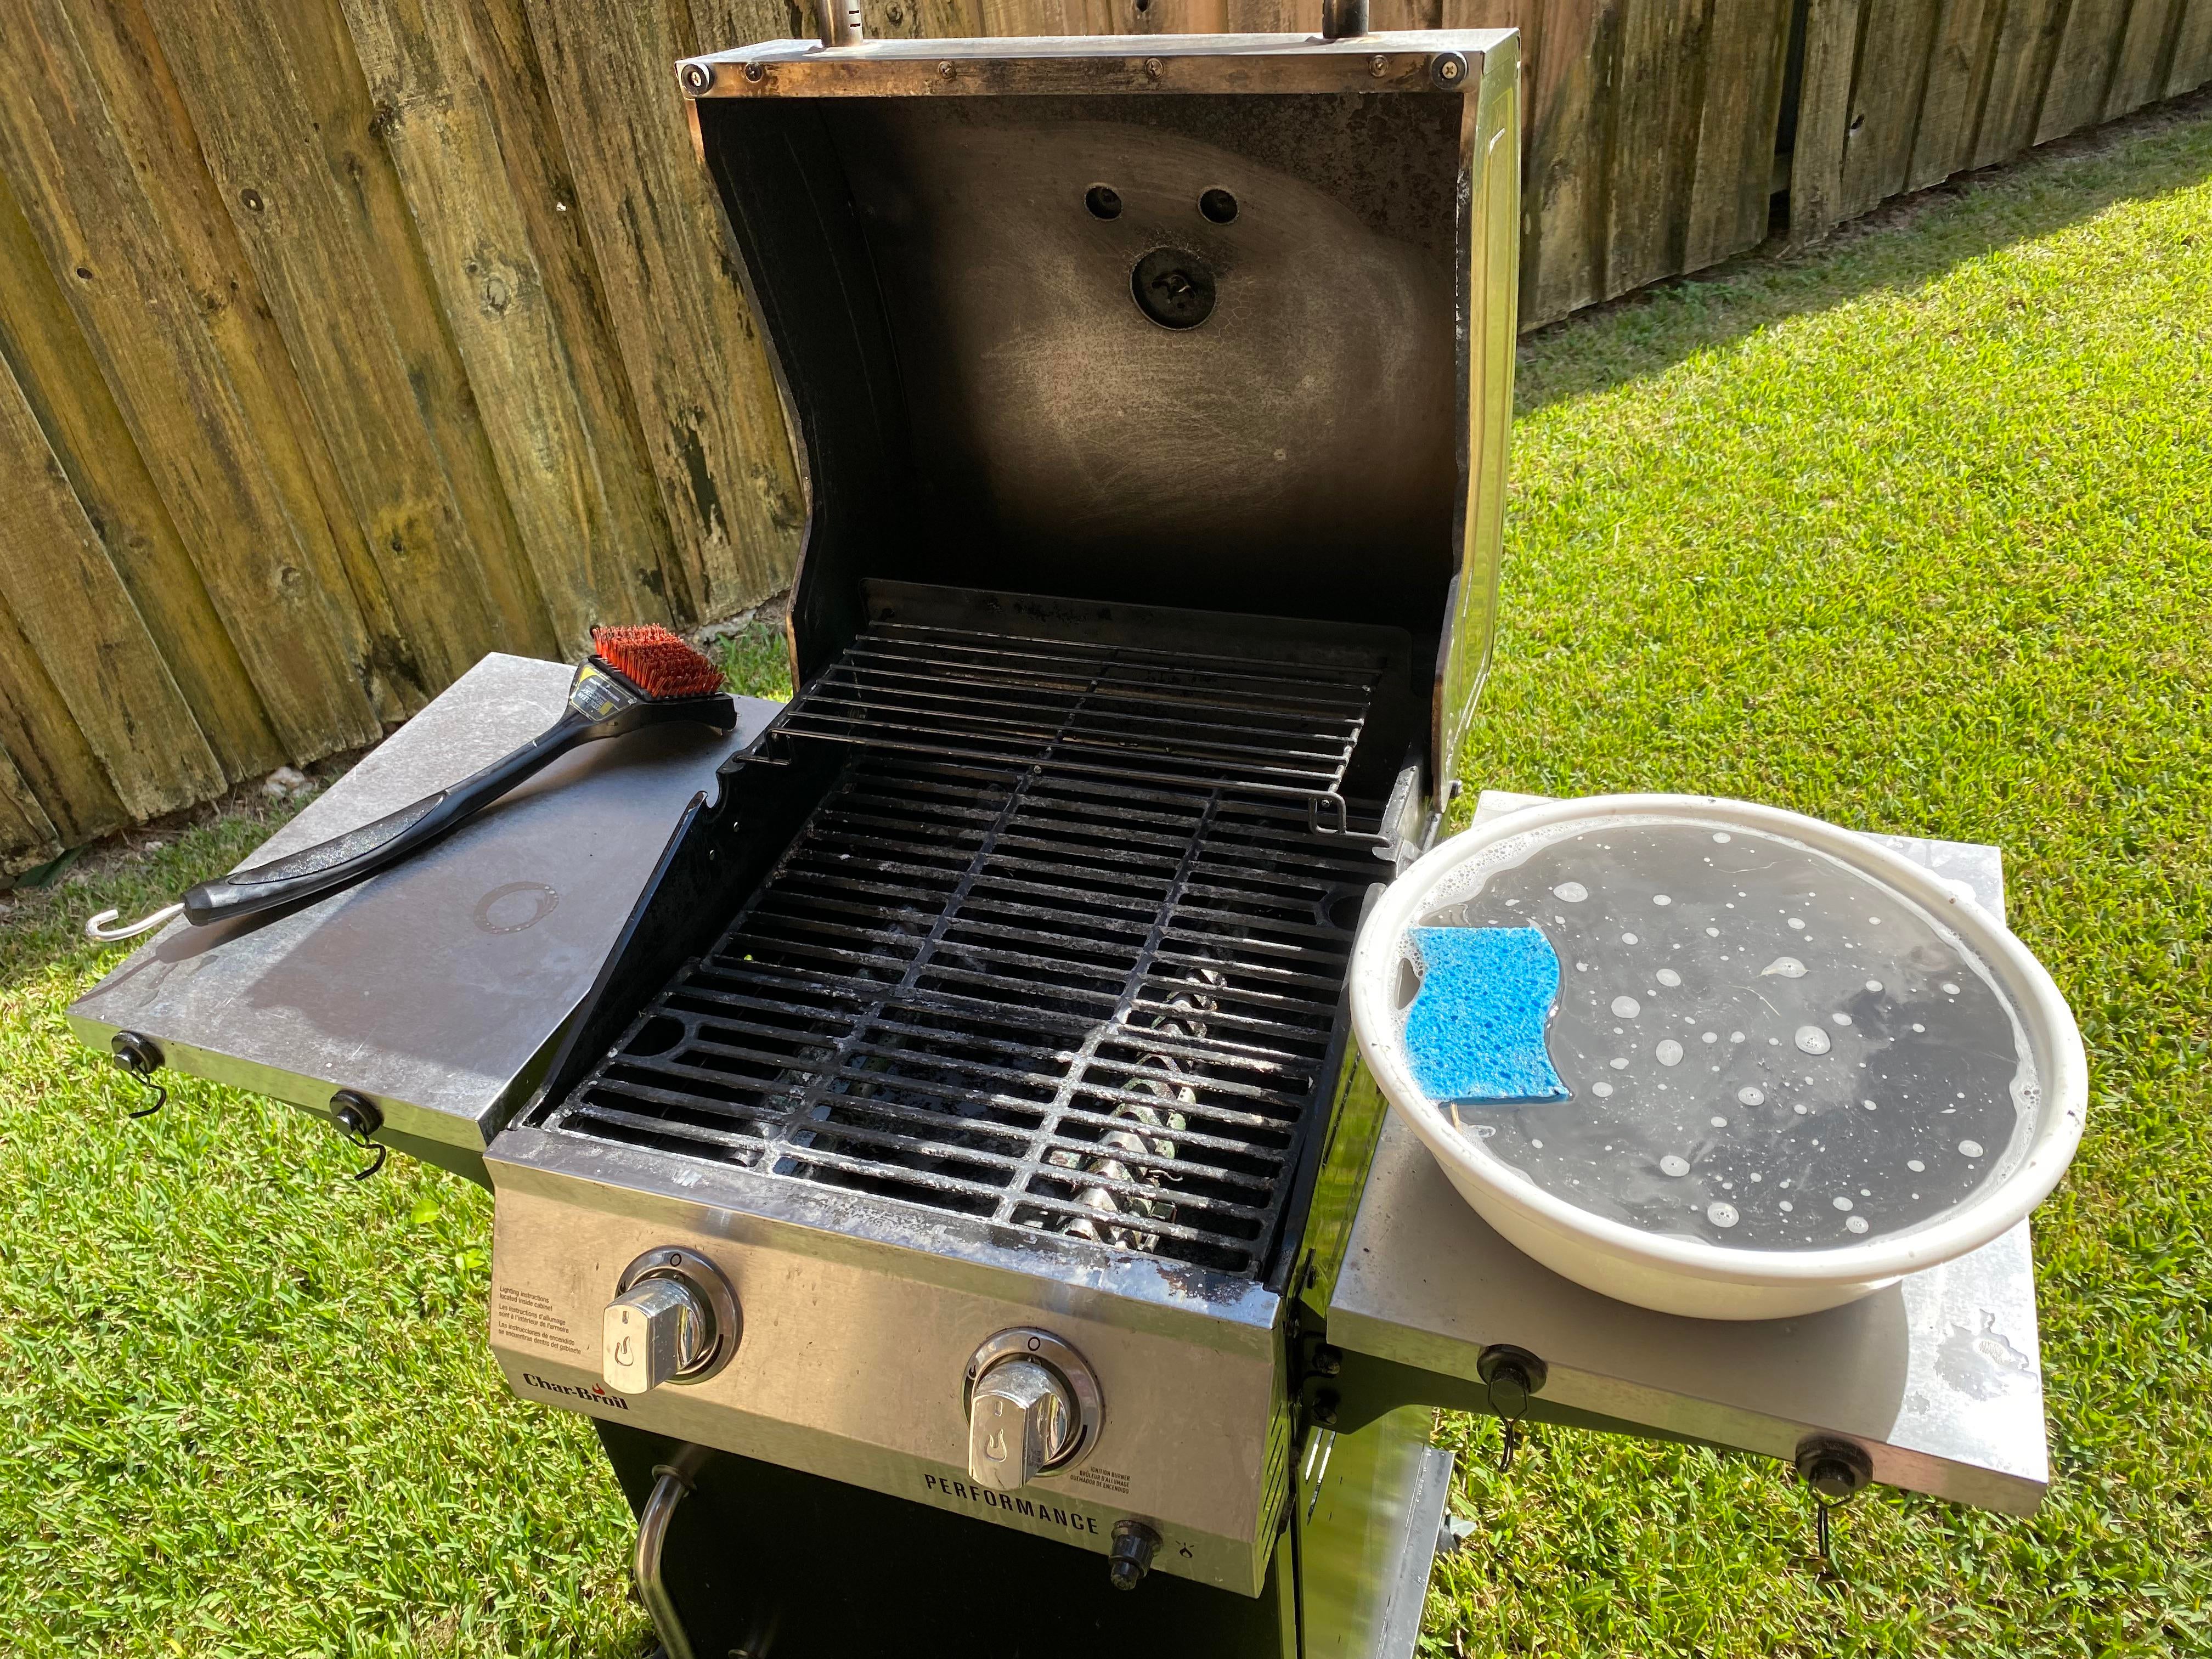 How to Clean Grill After Fire Extinguisher?